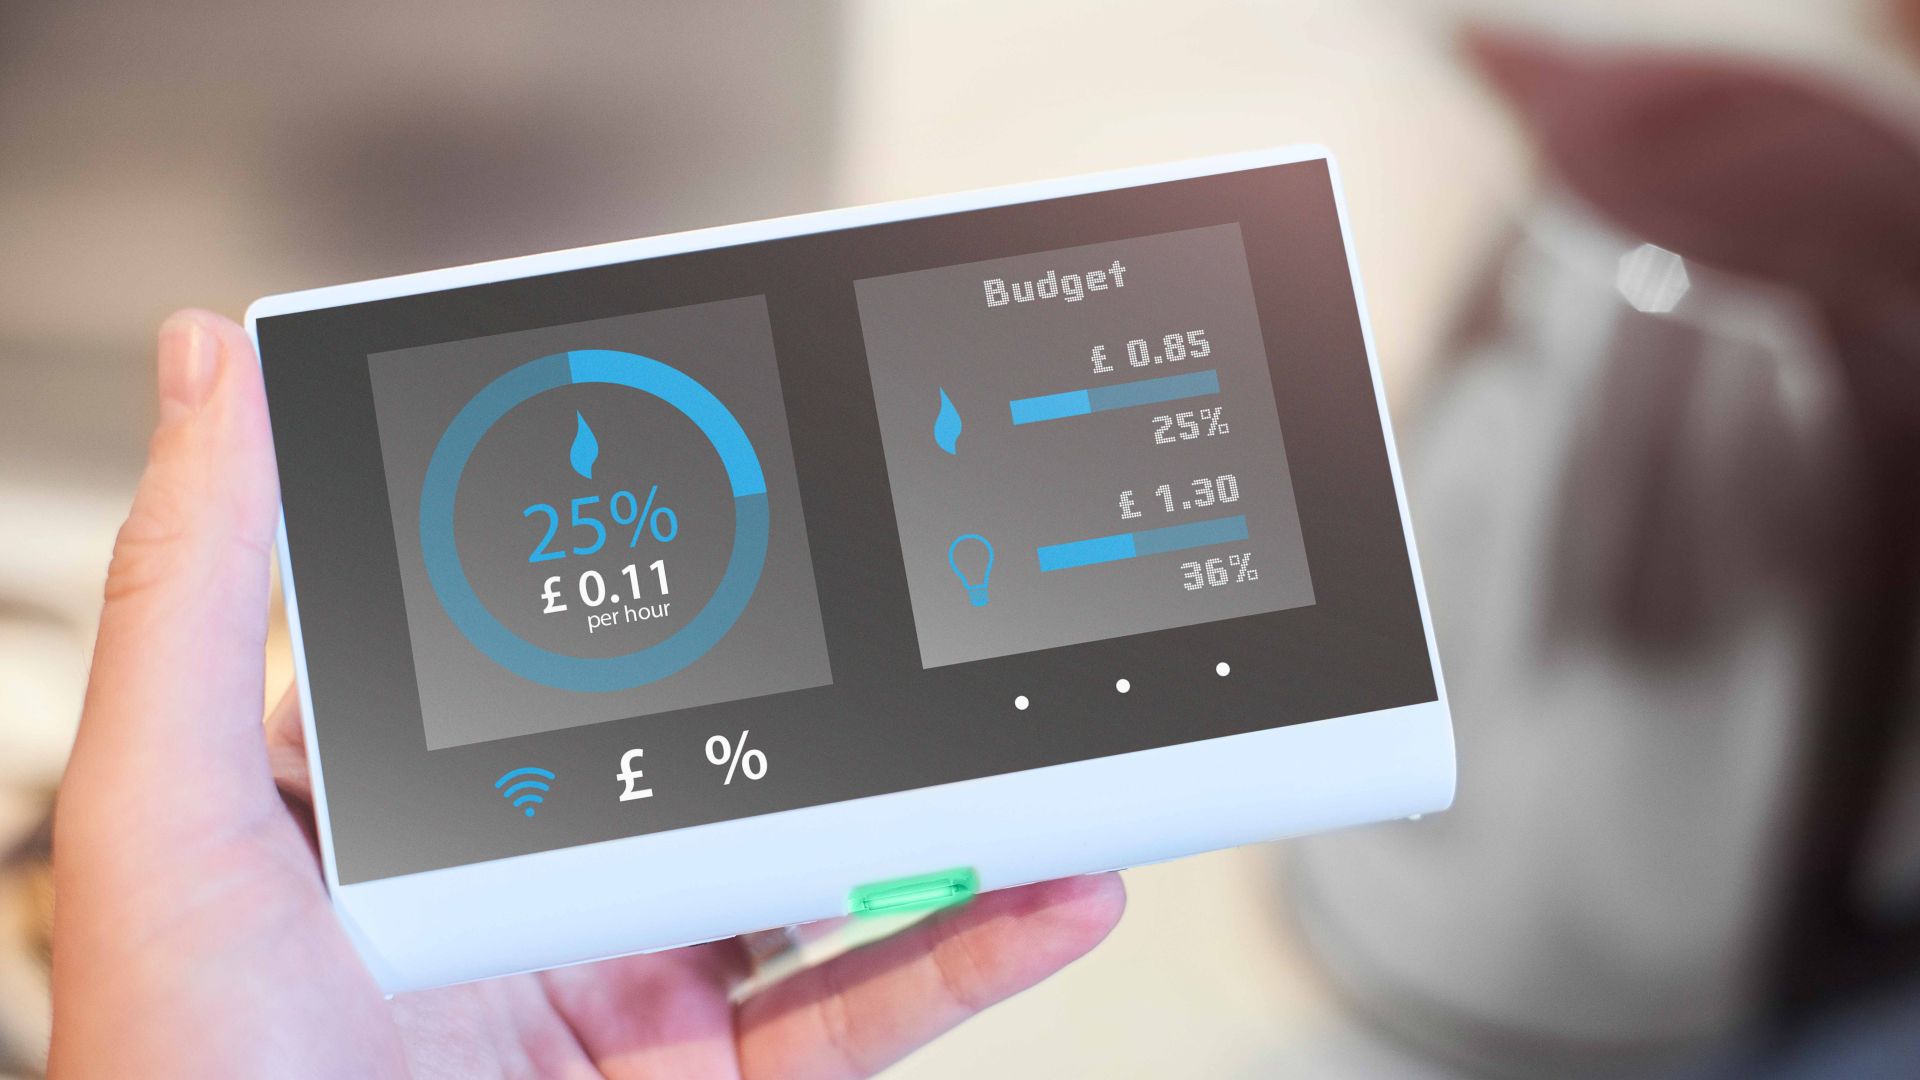 NB-IoT Smart Meter Market Share, Size, Type, Demand, Overview Analysis, Trends, Opportunities, Key Growth, key points, Development and Forecasts by 2032